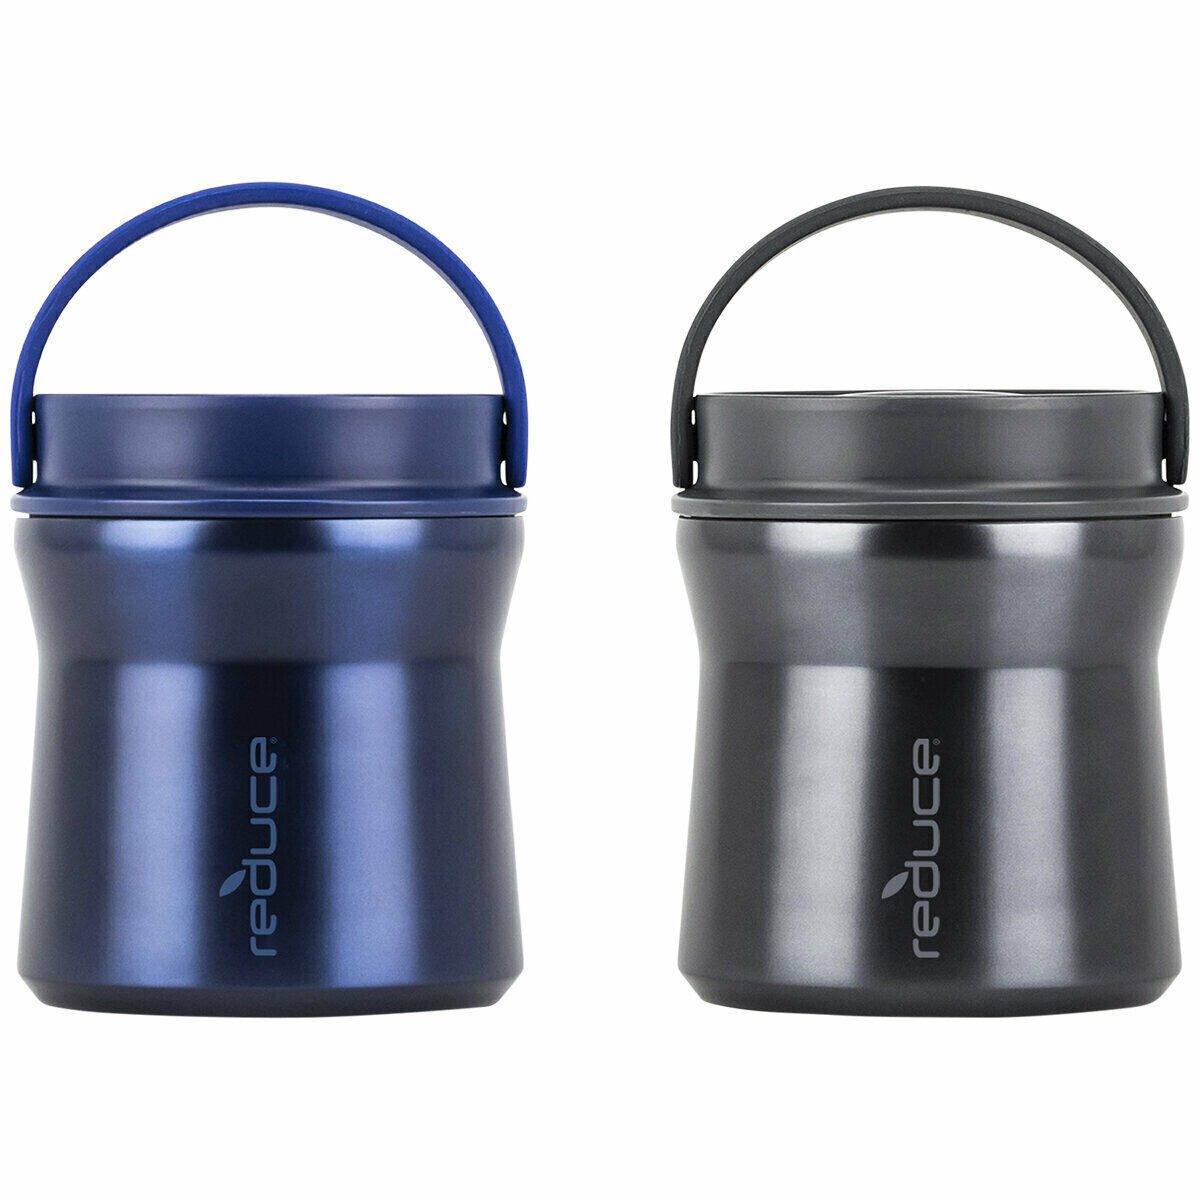 2 x Vacuum Insulated Leakproof Bowl Flask Black & Blue